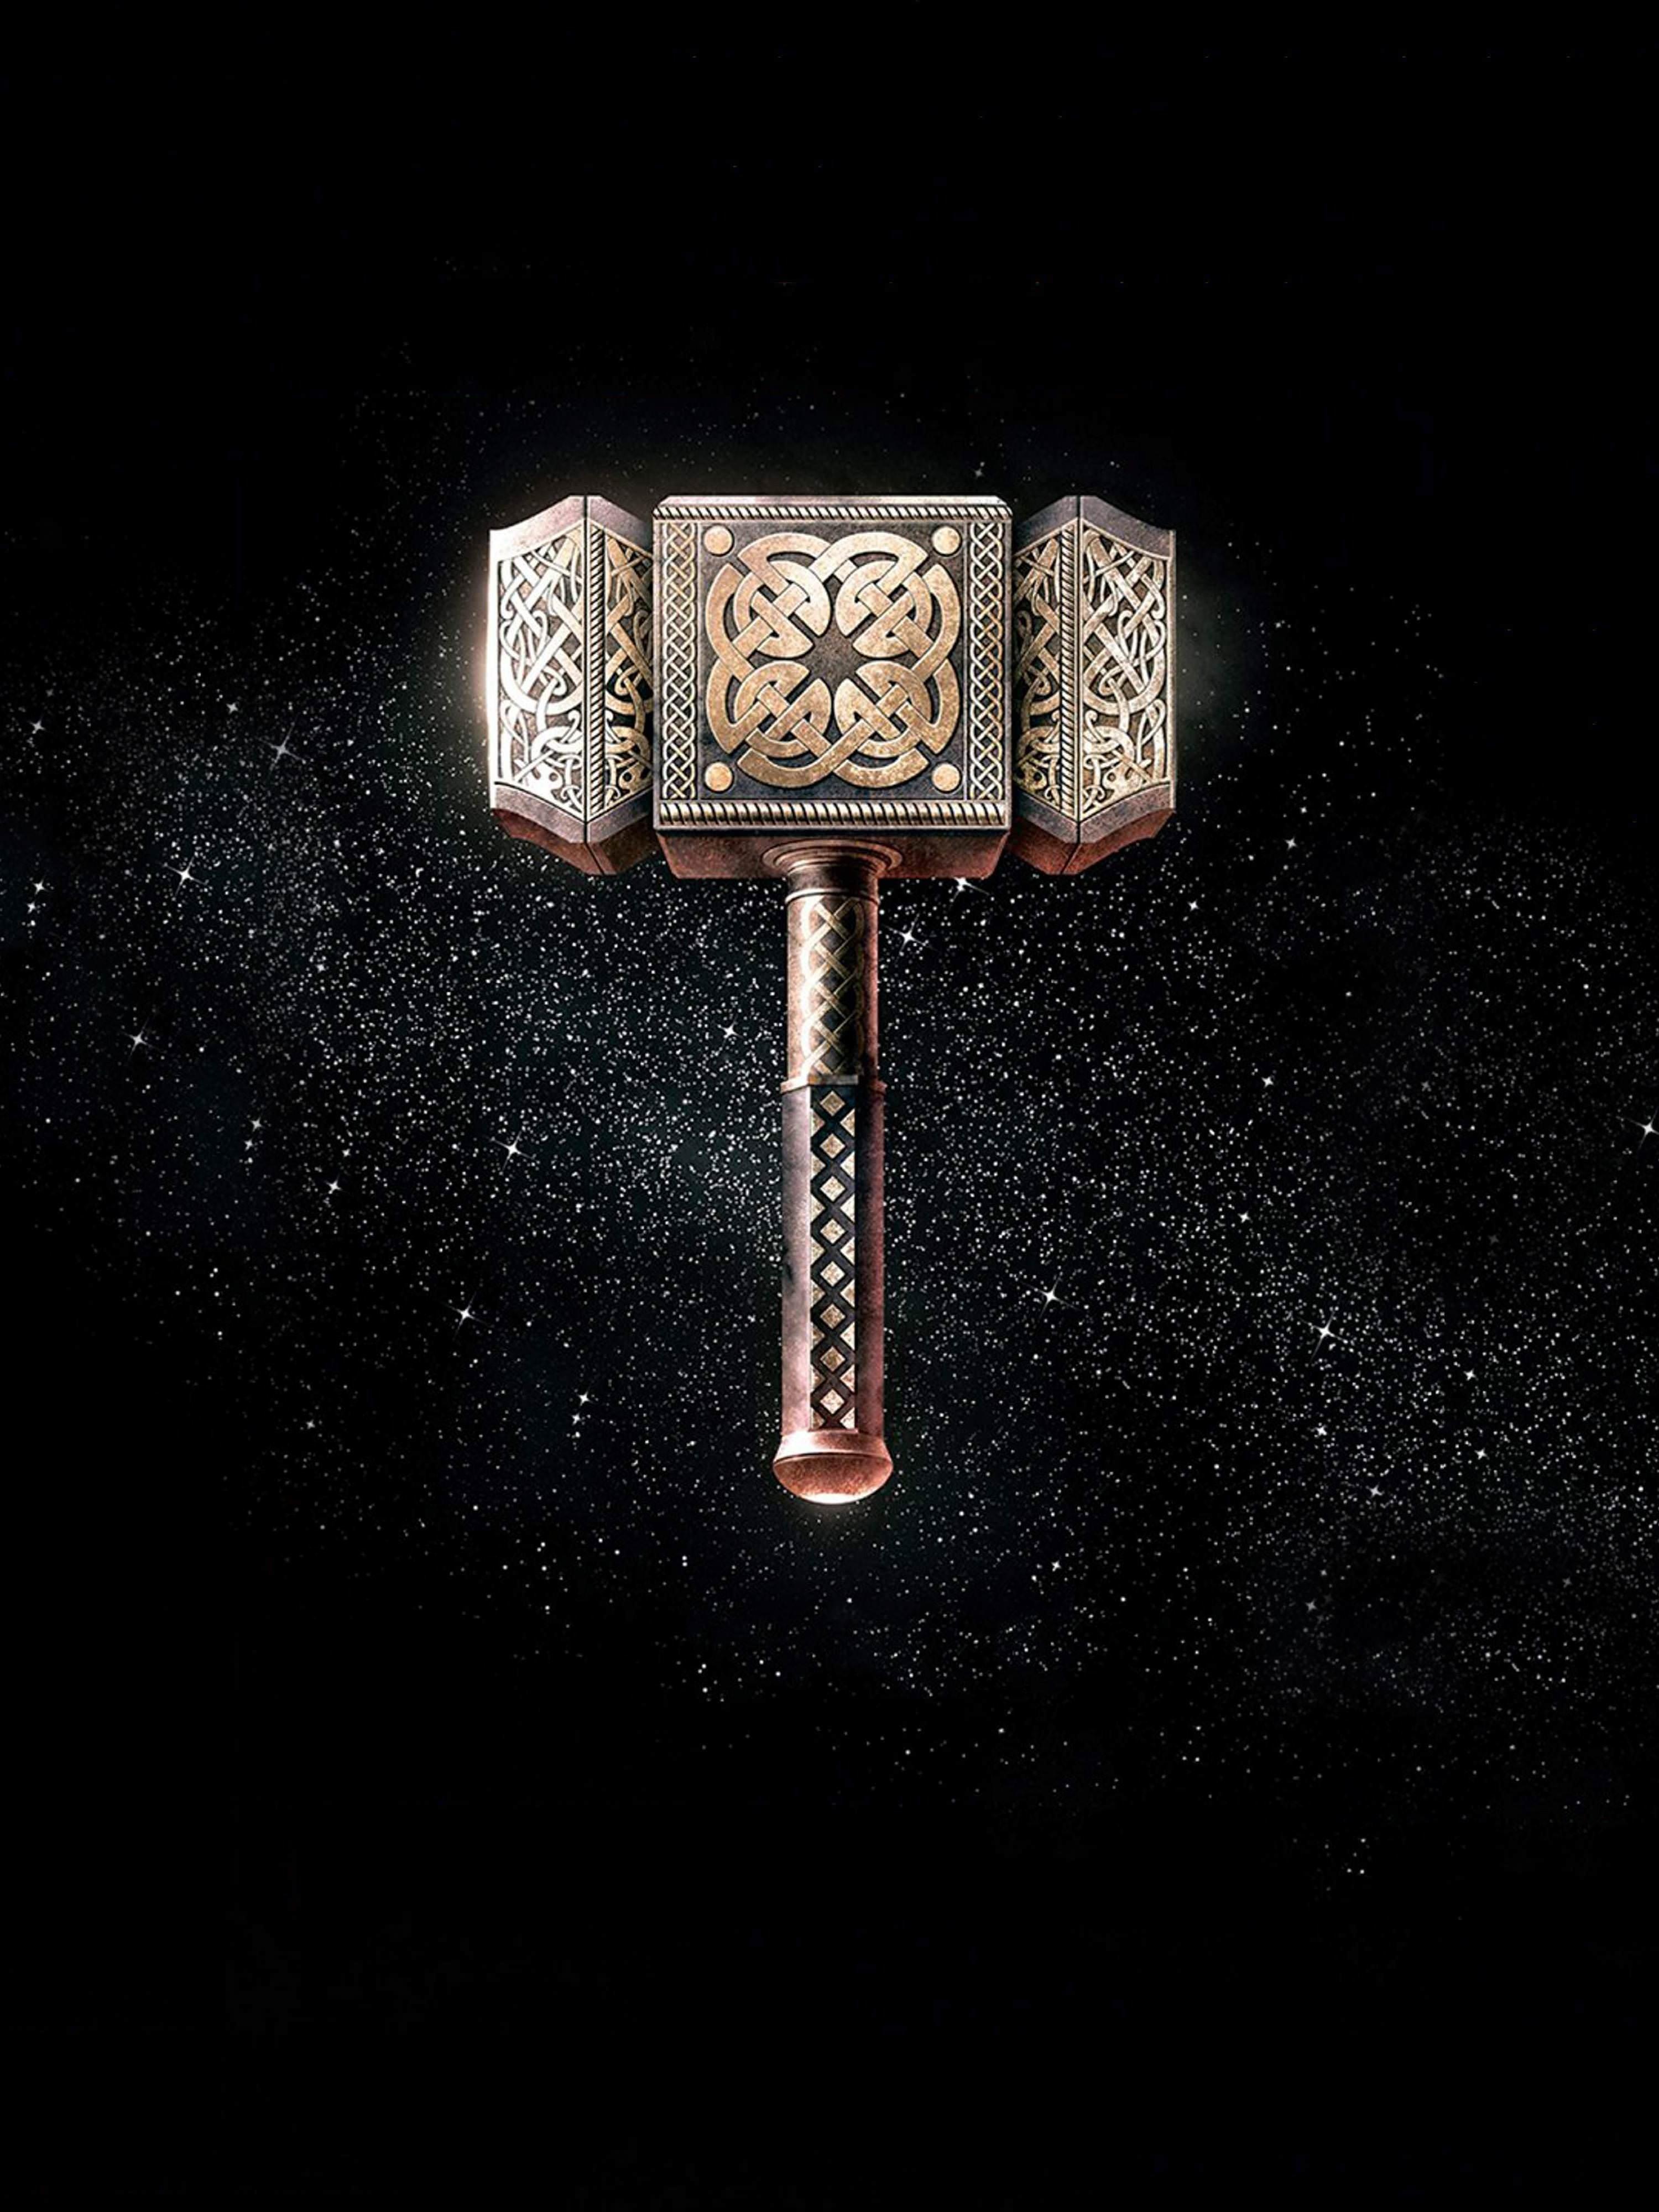 I cleaned up a quick phone wallpaper of Mjölnir from